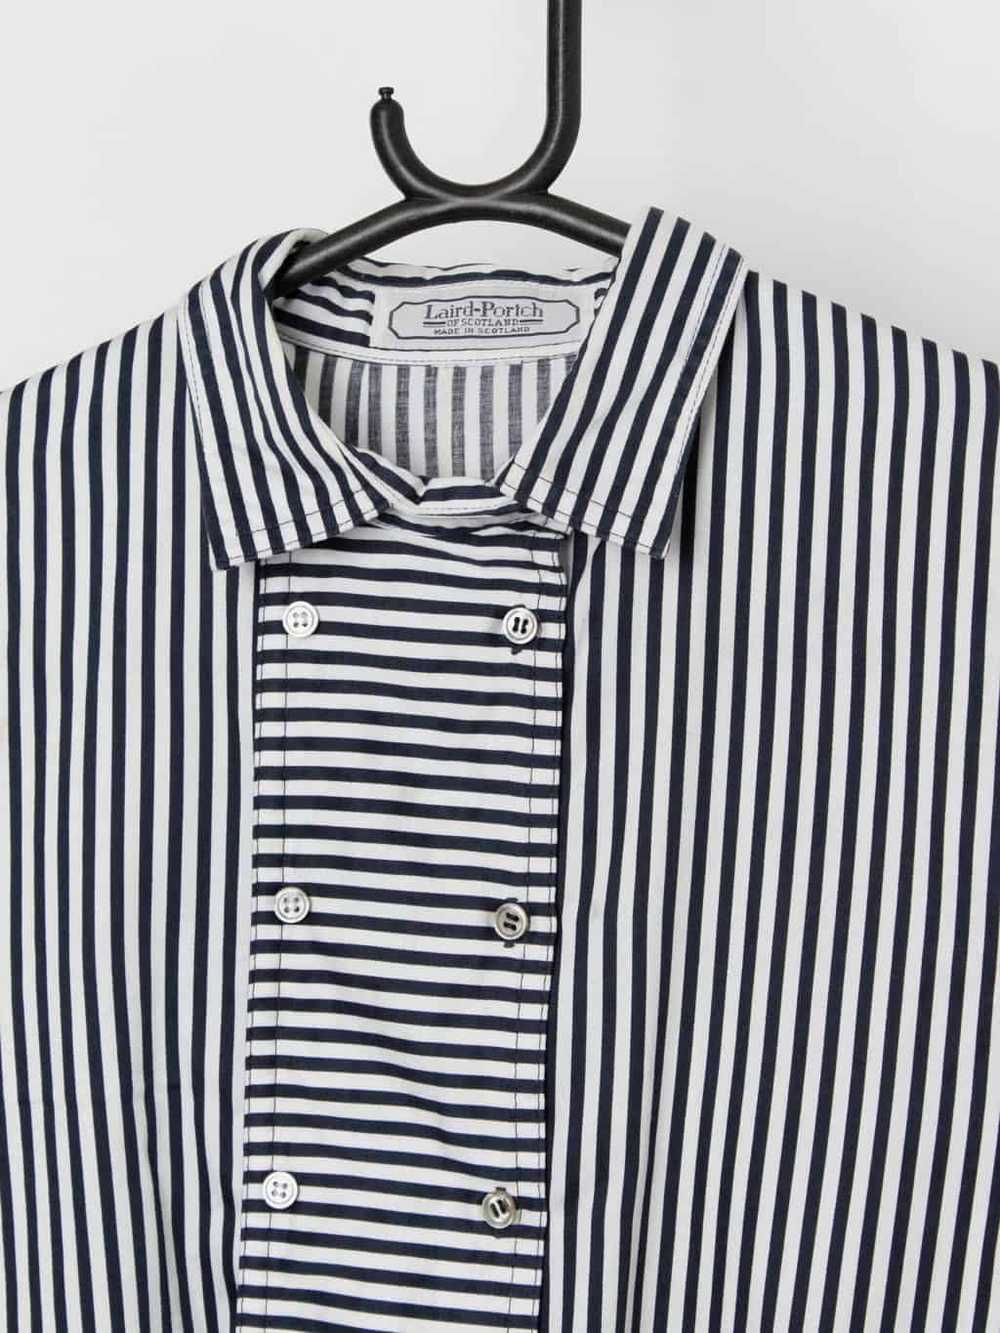 Vintage Laird-Portch striped blouse in navy and w… - image 2